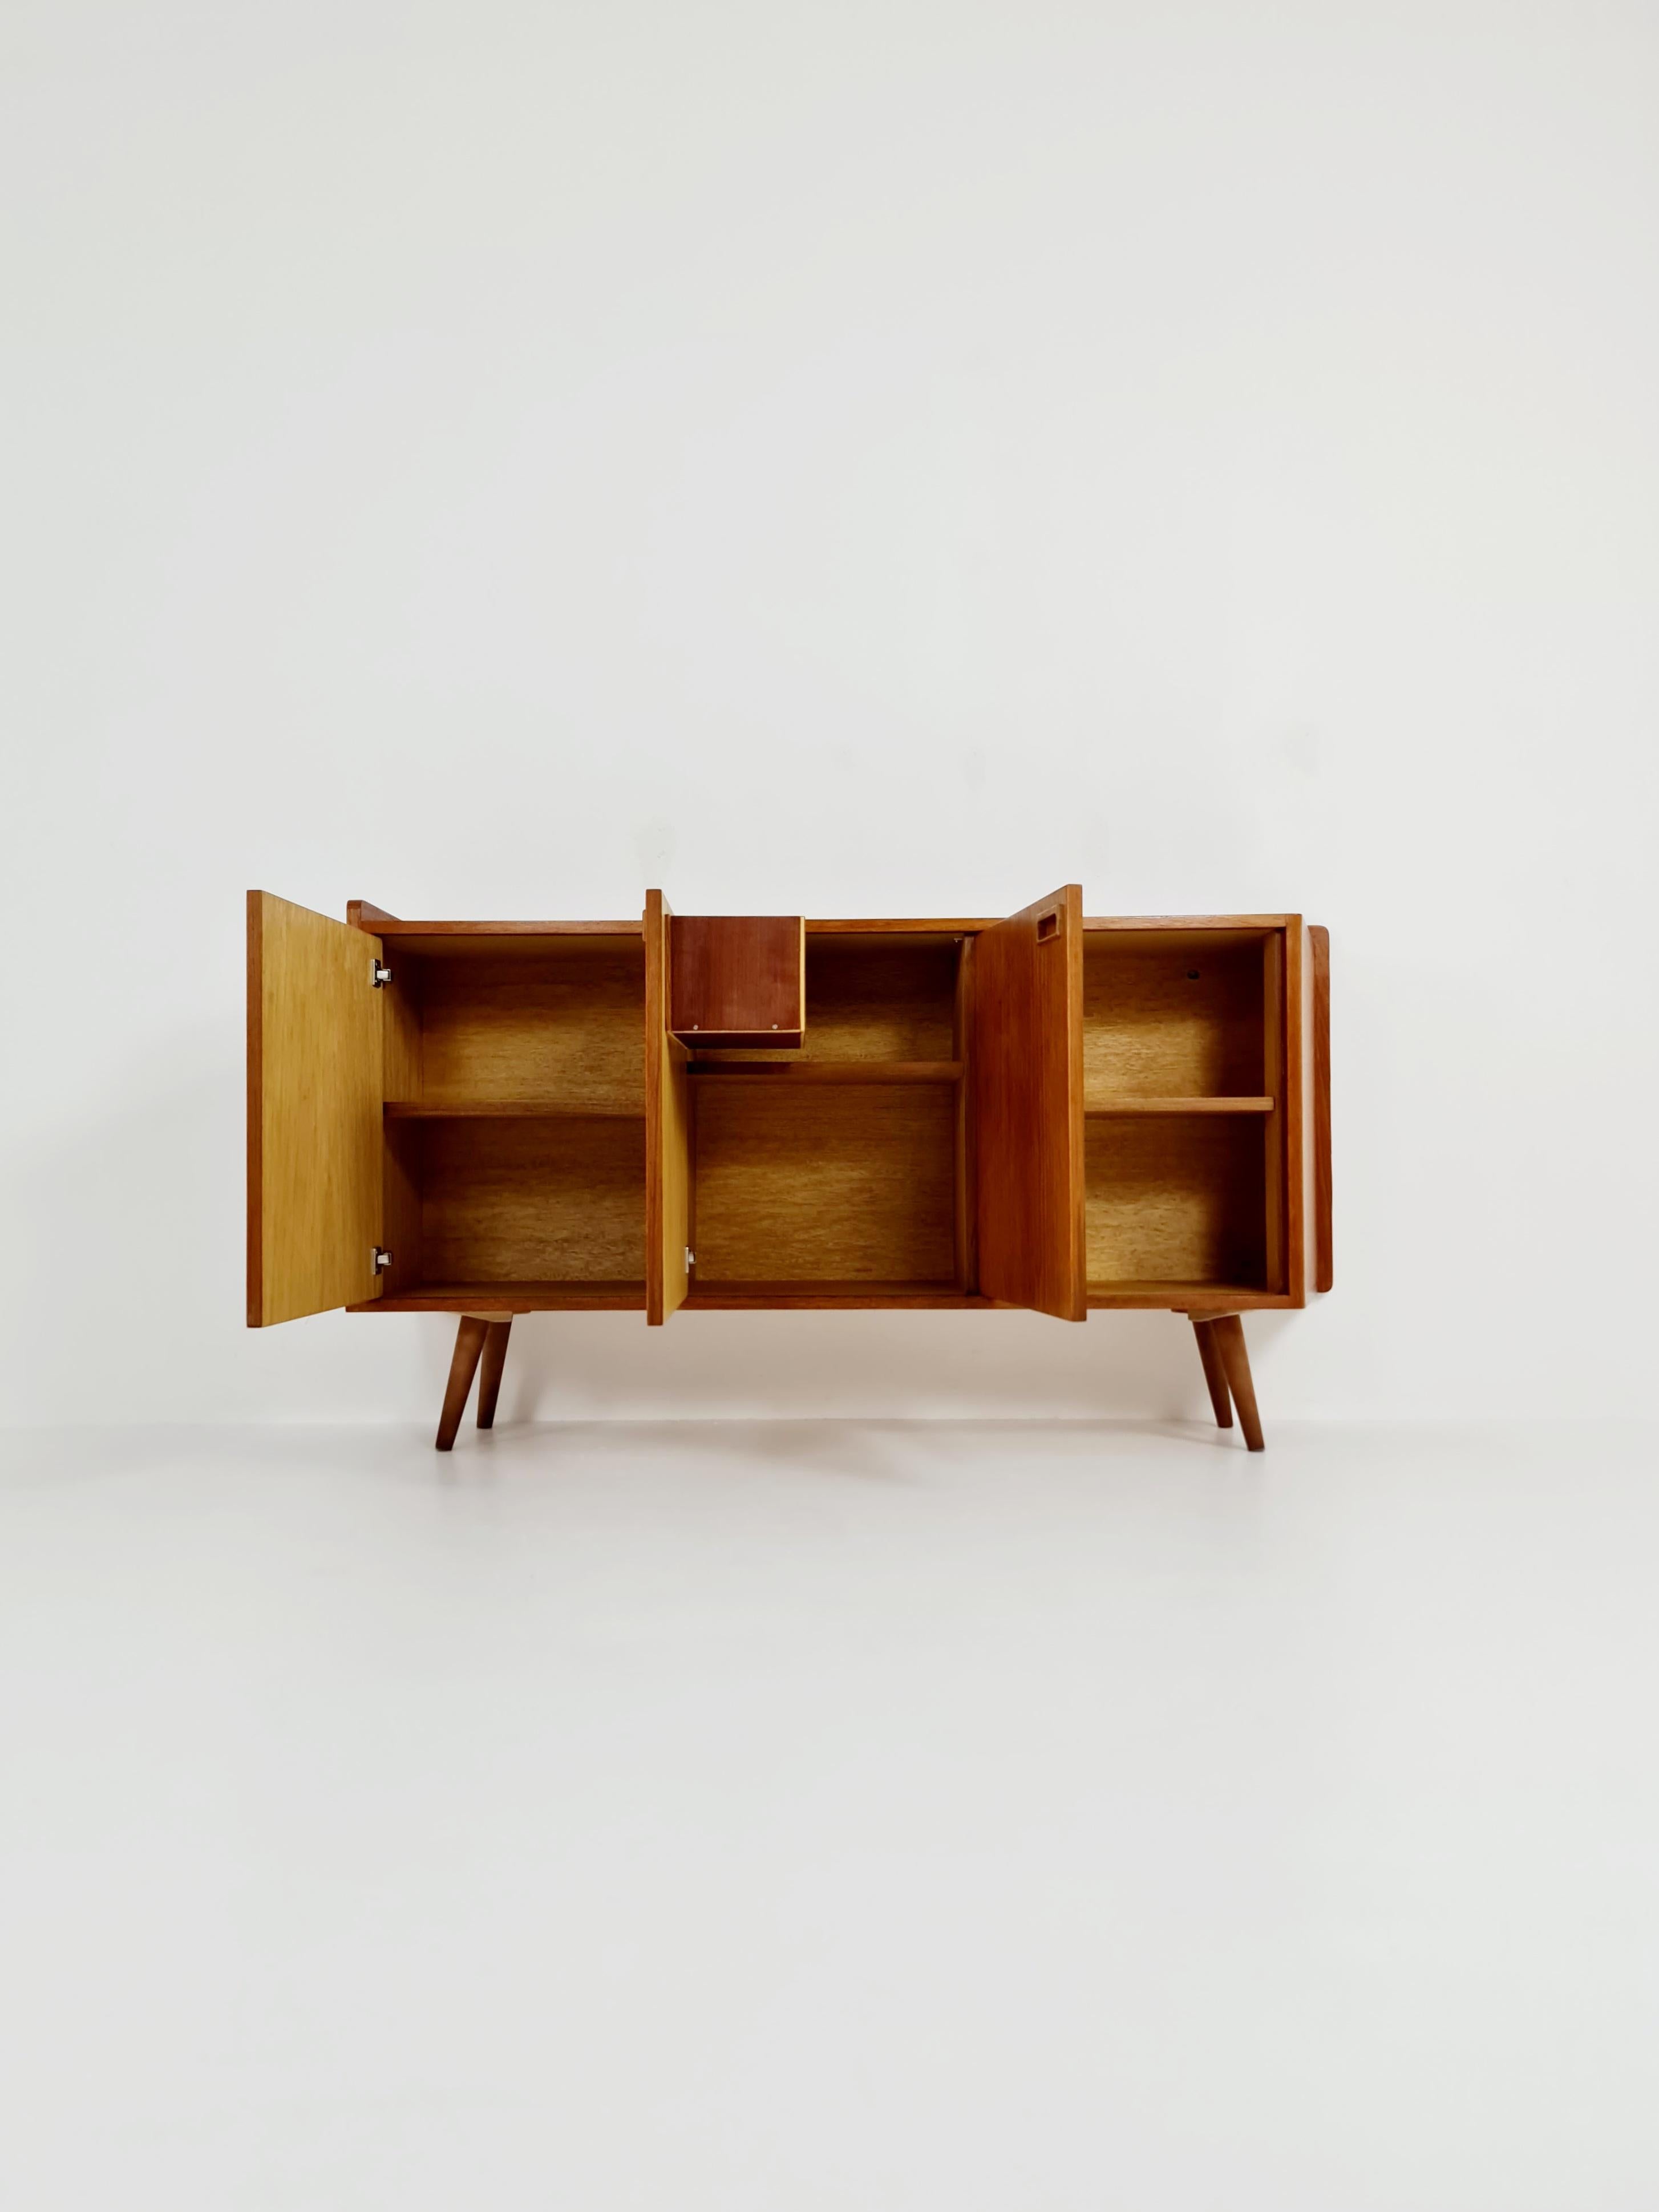 Rare Scandinavian Vintage Teak Sideboard left Corner-fit, 1960s

this sidebord was customized to fit specify on the corner, allowing acesss to adjacent areas, like a door on the left side in this case.


Danish Design

Dimensions: 
37 D x 155  W x